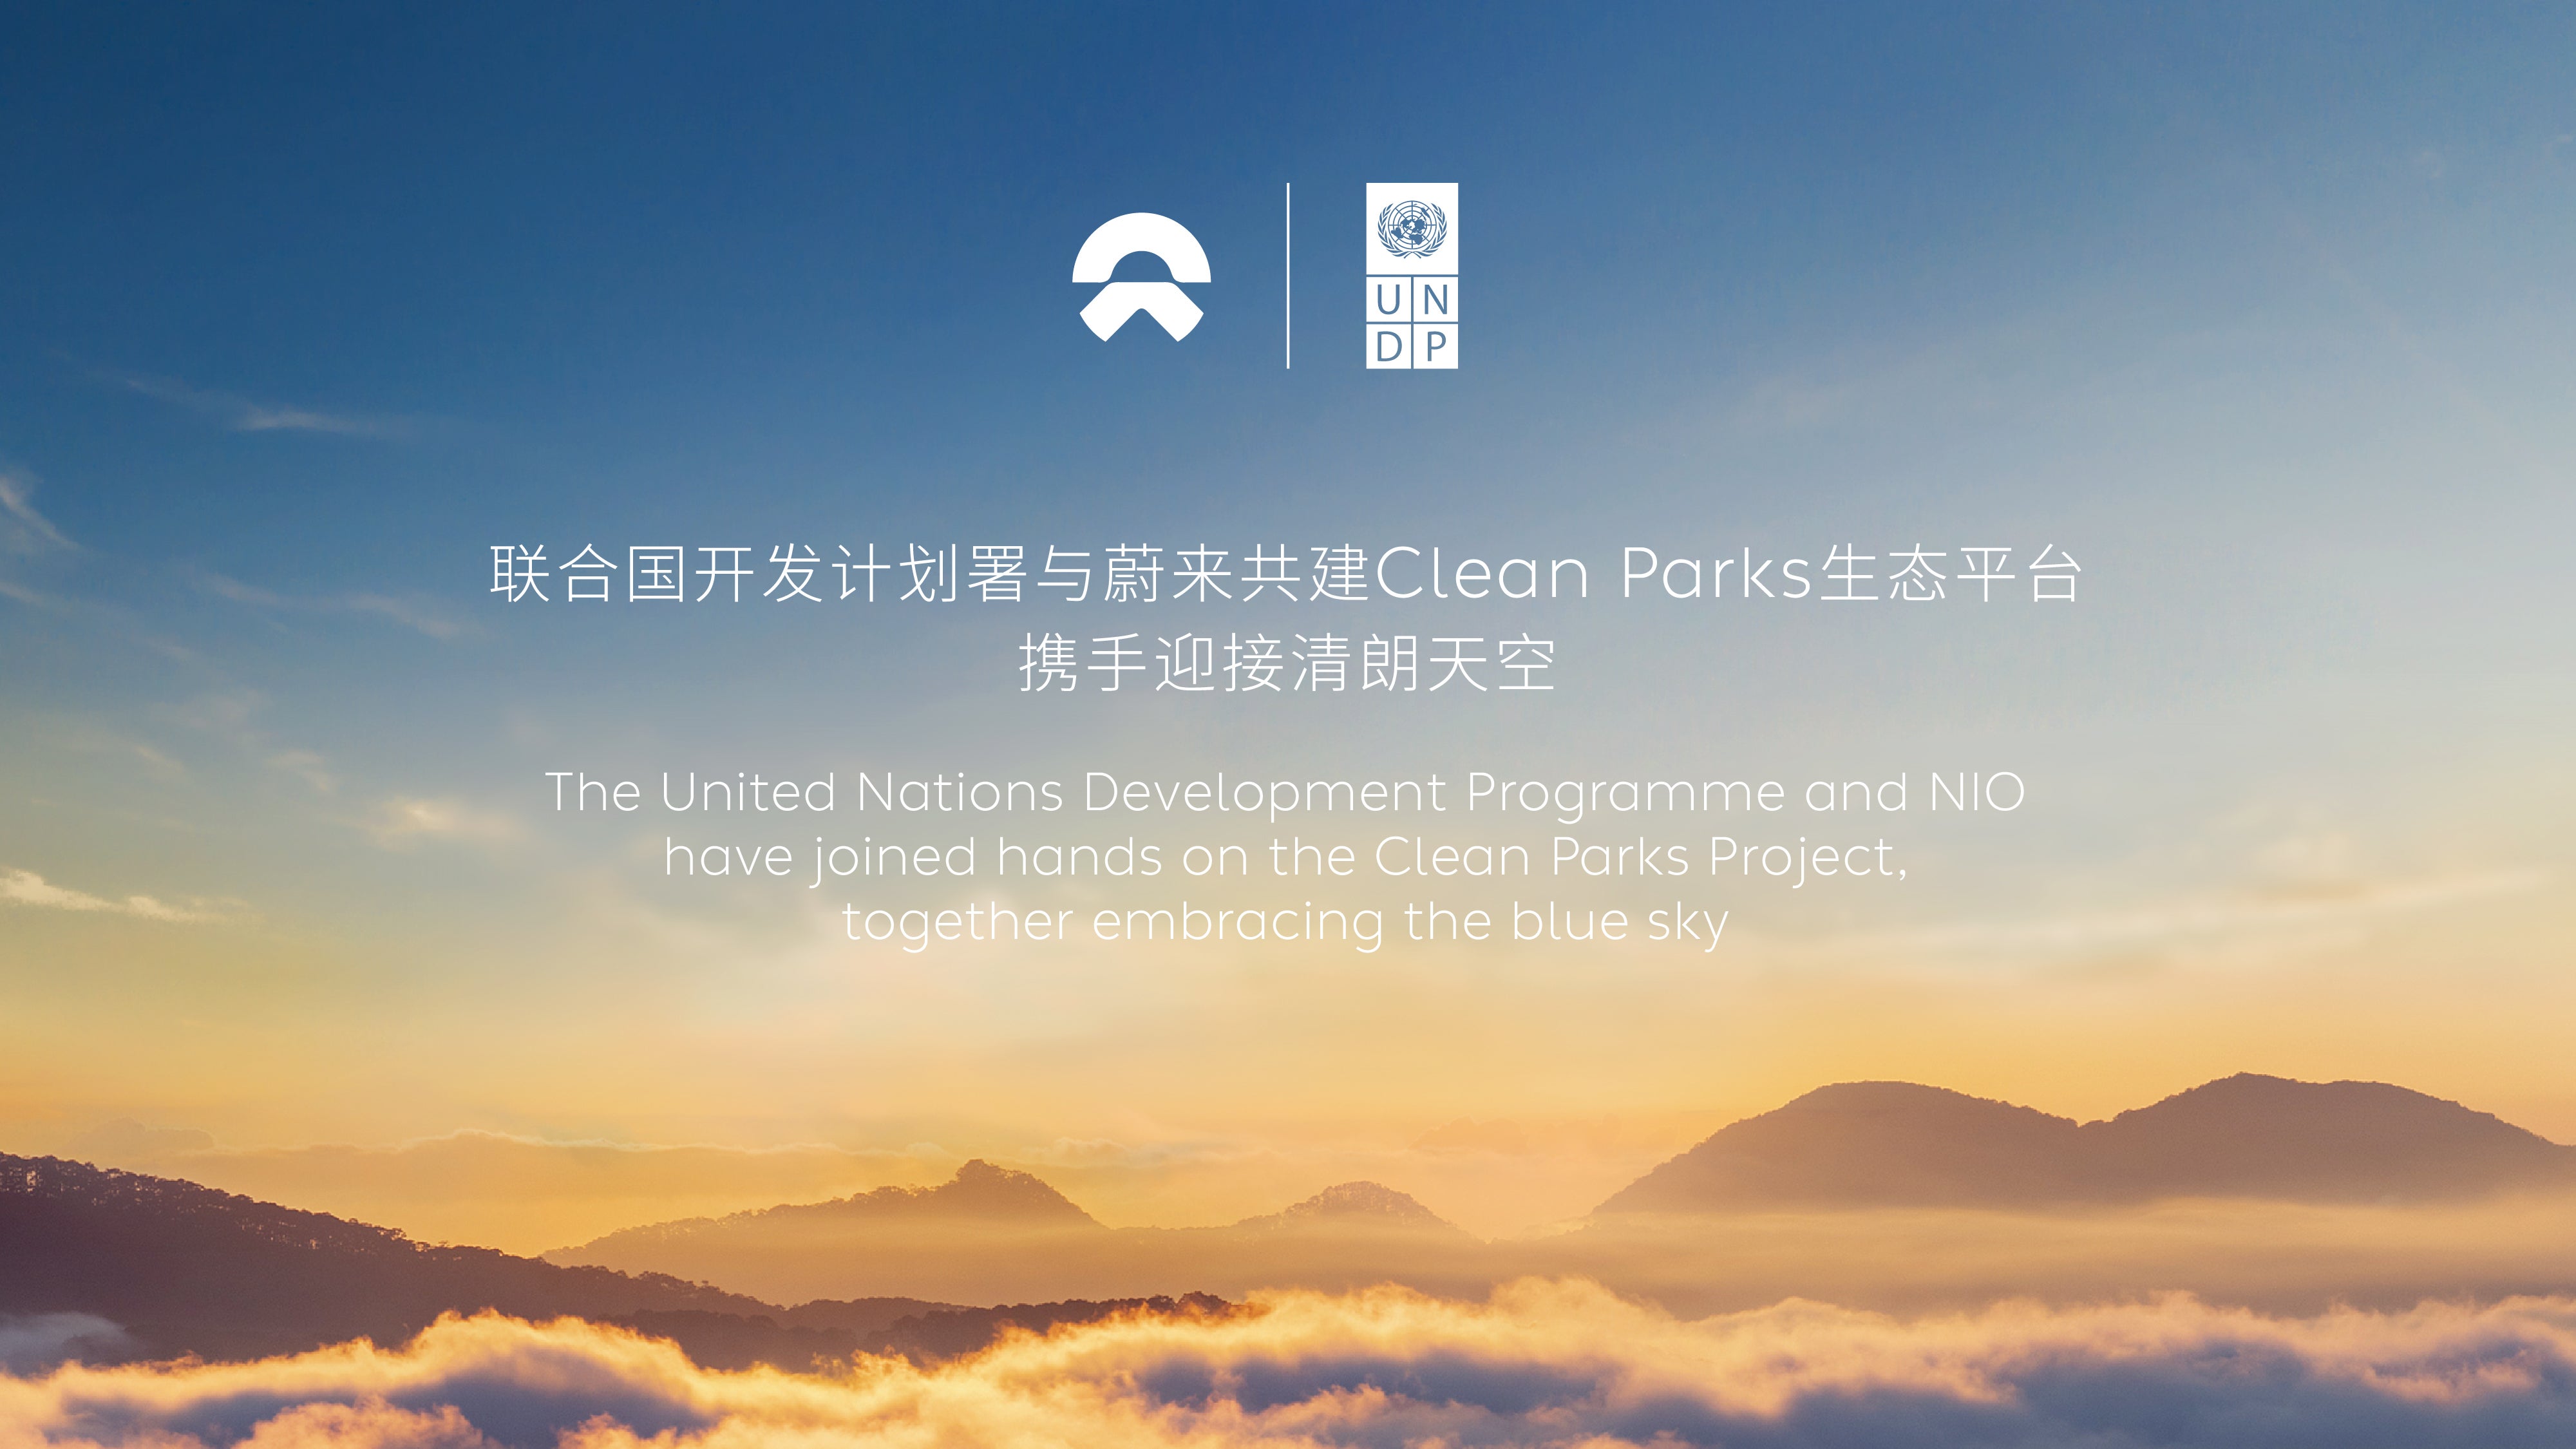 The United Nations Development Programme and NIO have joined hands on the Clean Parks Project